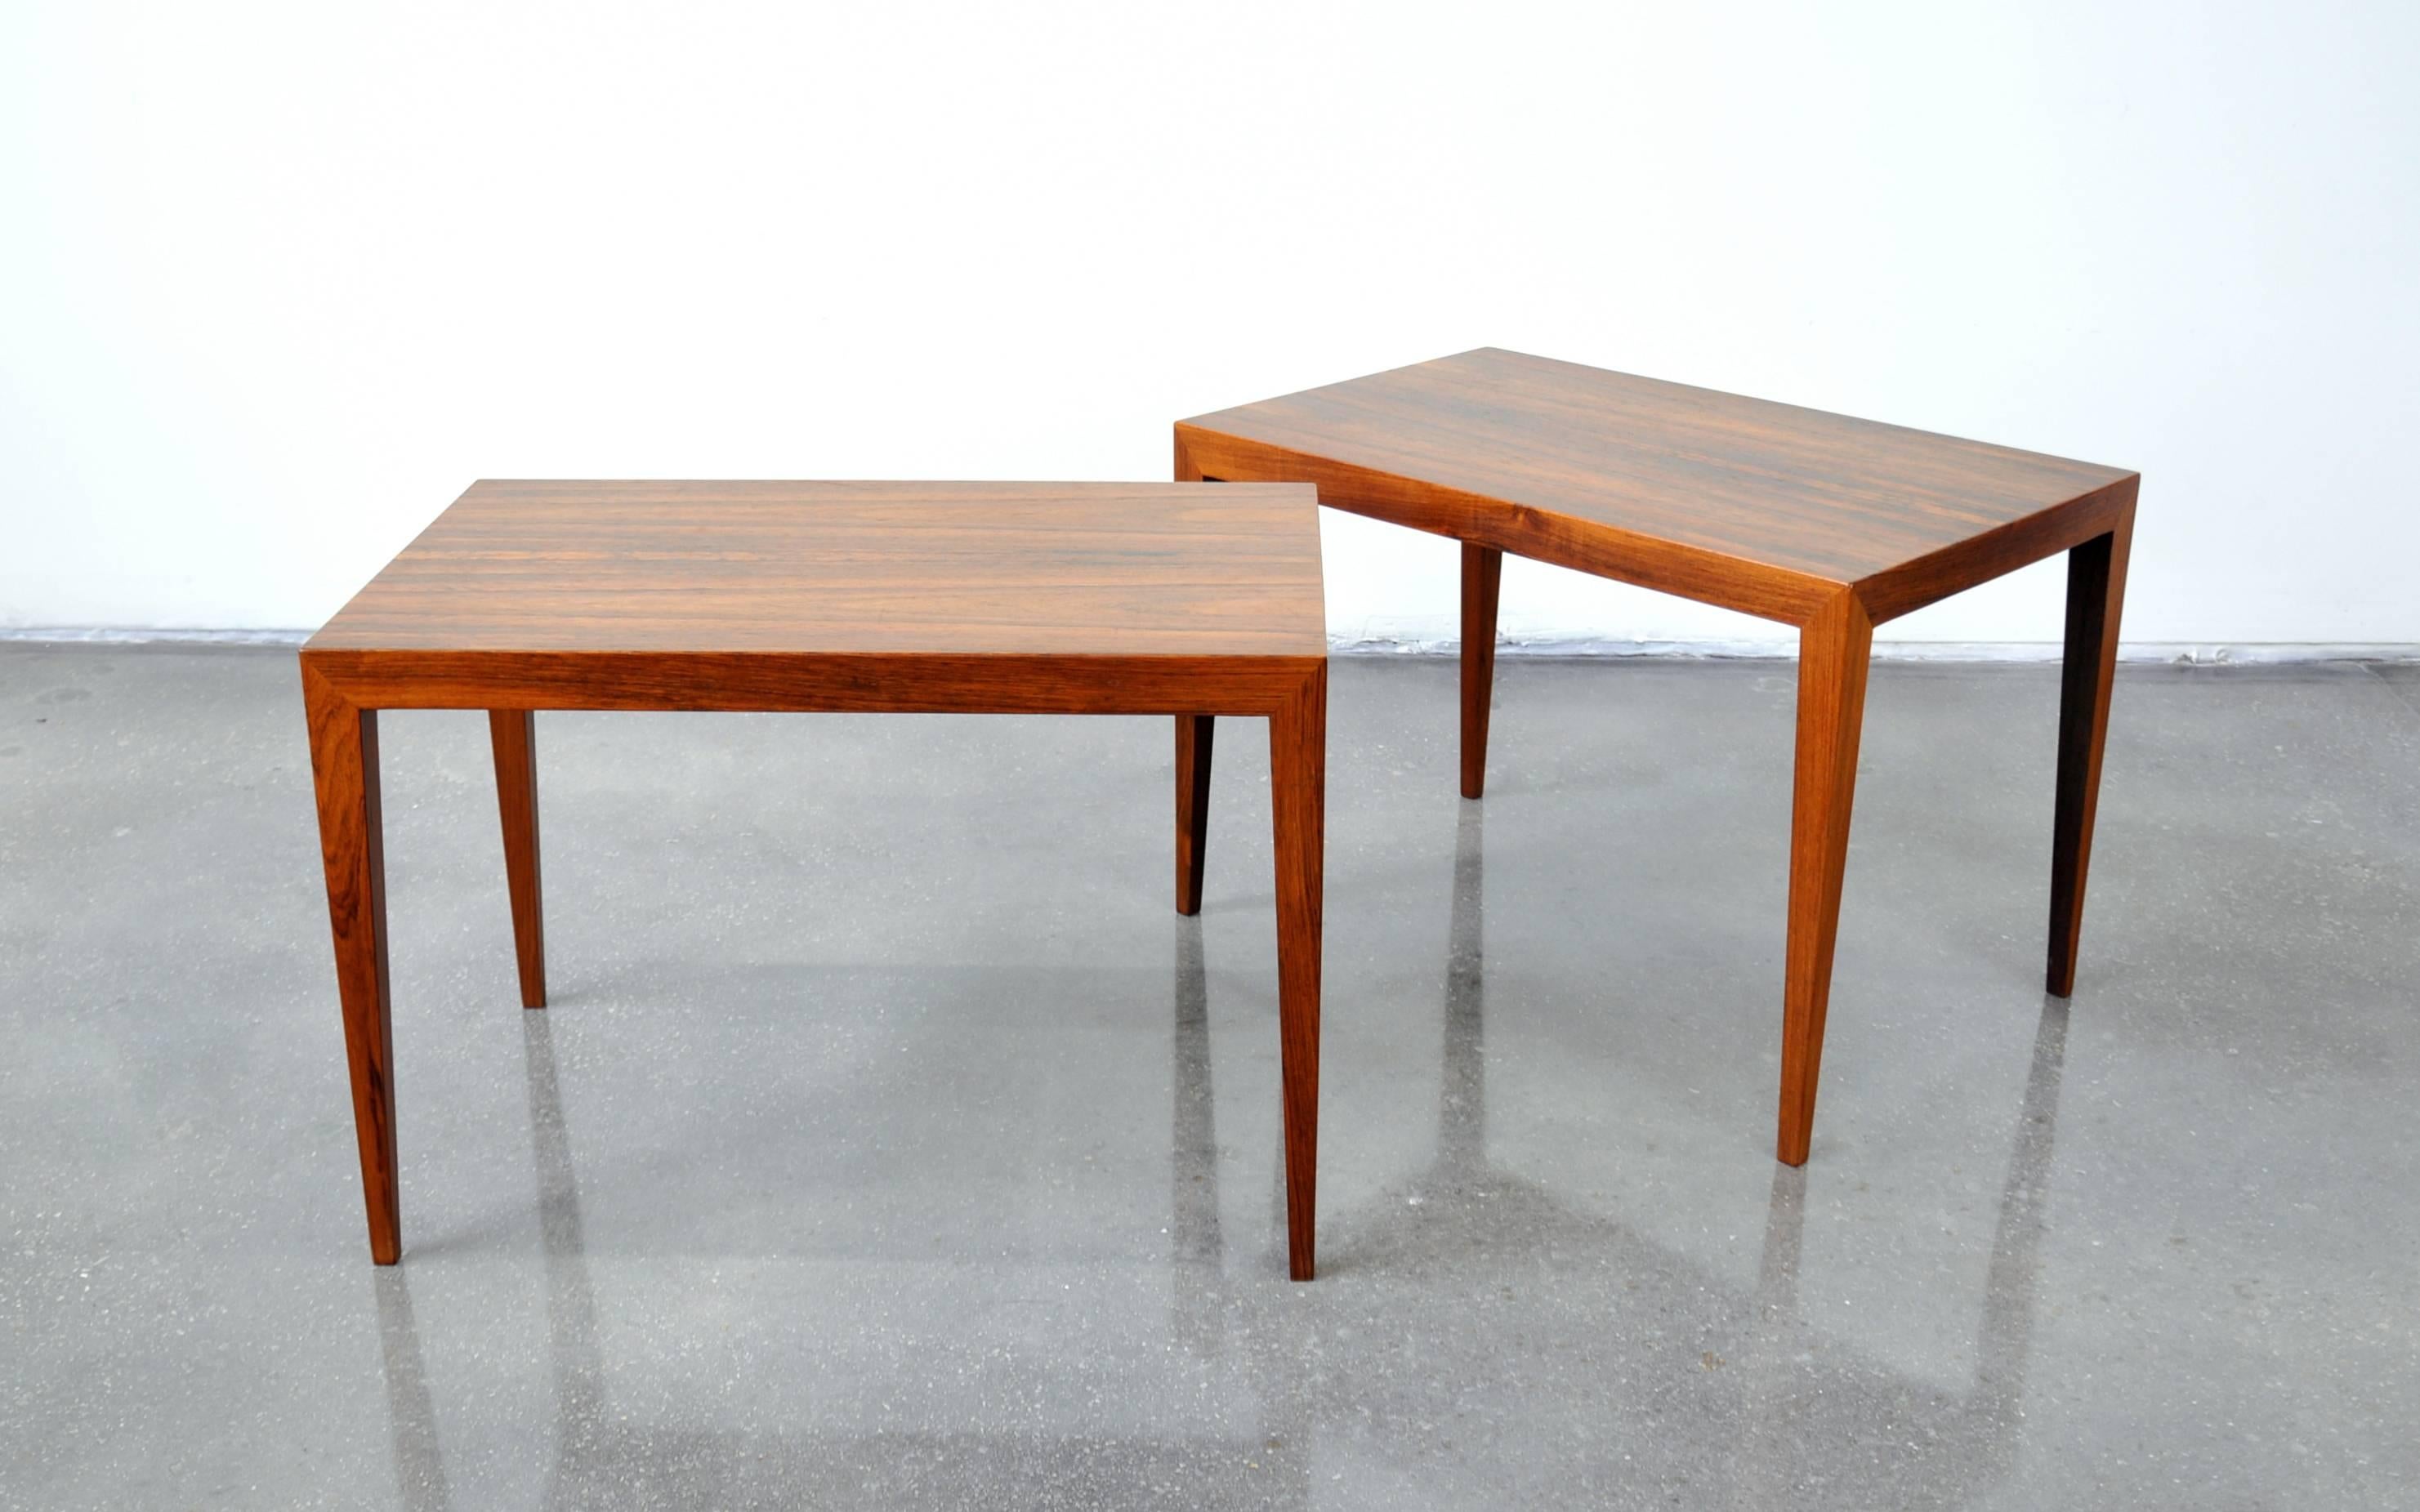 Gorgeous pair of Mid-Century Brazilian rosewood end tables designed by Severin Hansen for Haslev Mobelsnedkeri, dating from the mid-1950s. The occasional tables feature perfectly bookmatched rosewood grains that cleverly allow them to be used